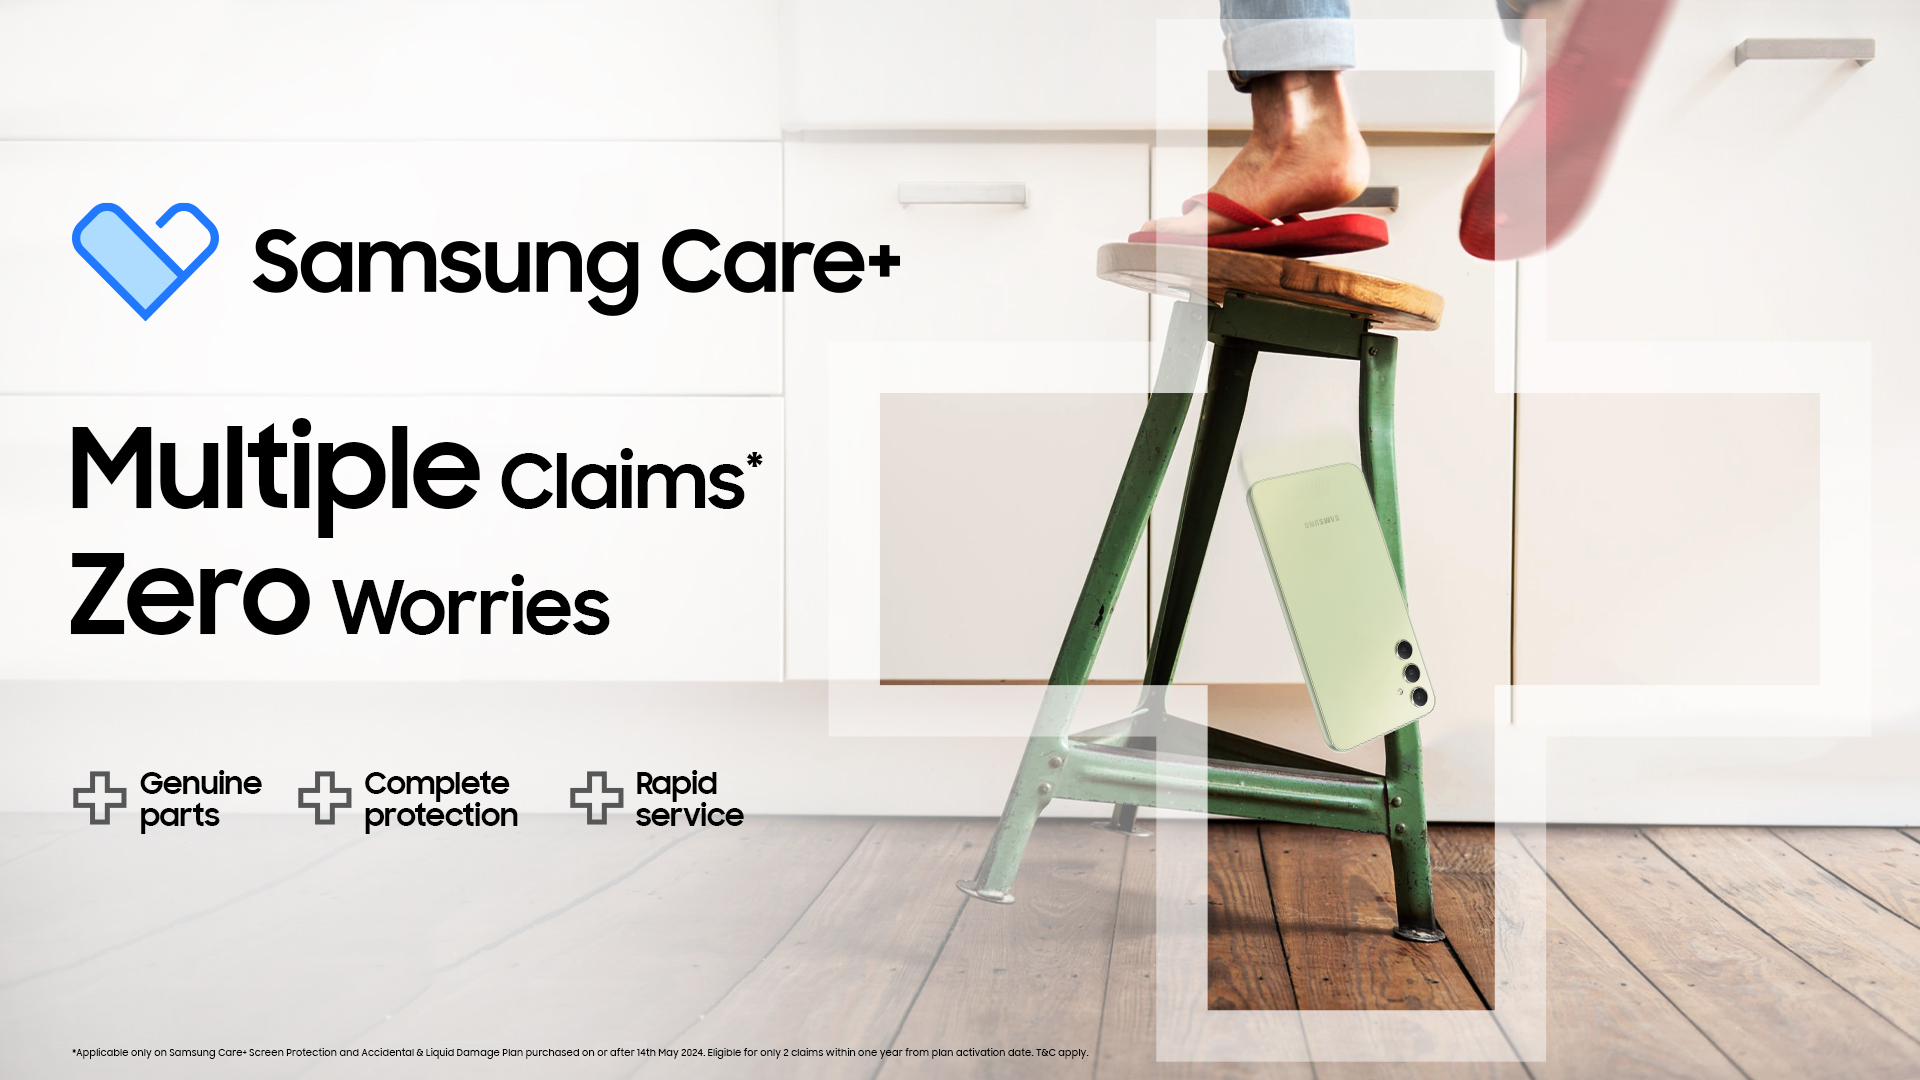 Samsung Updates Samsung Care+ Programme with Added Benefits